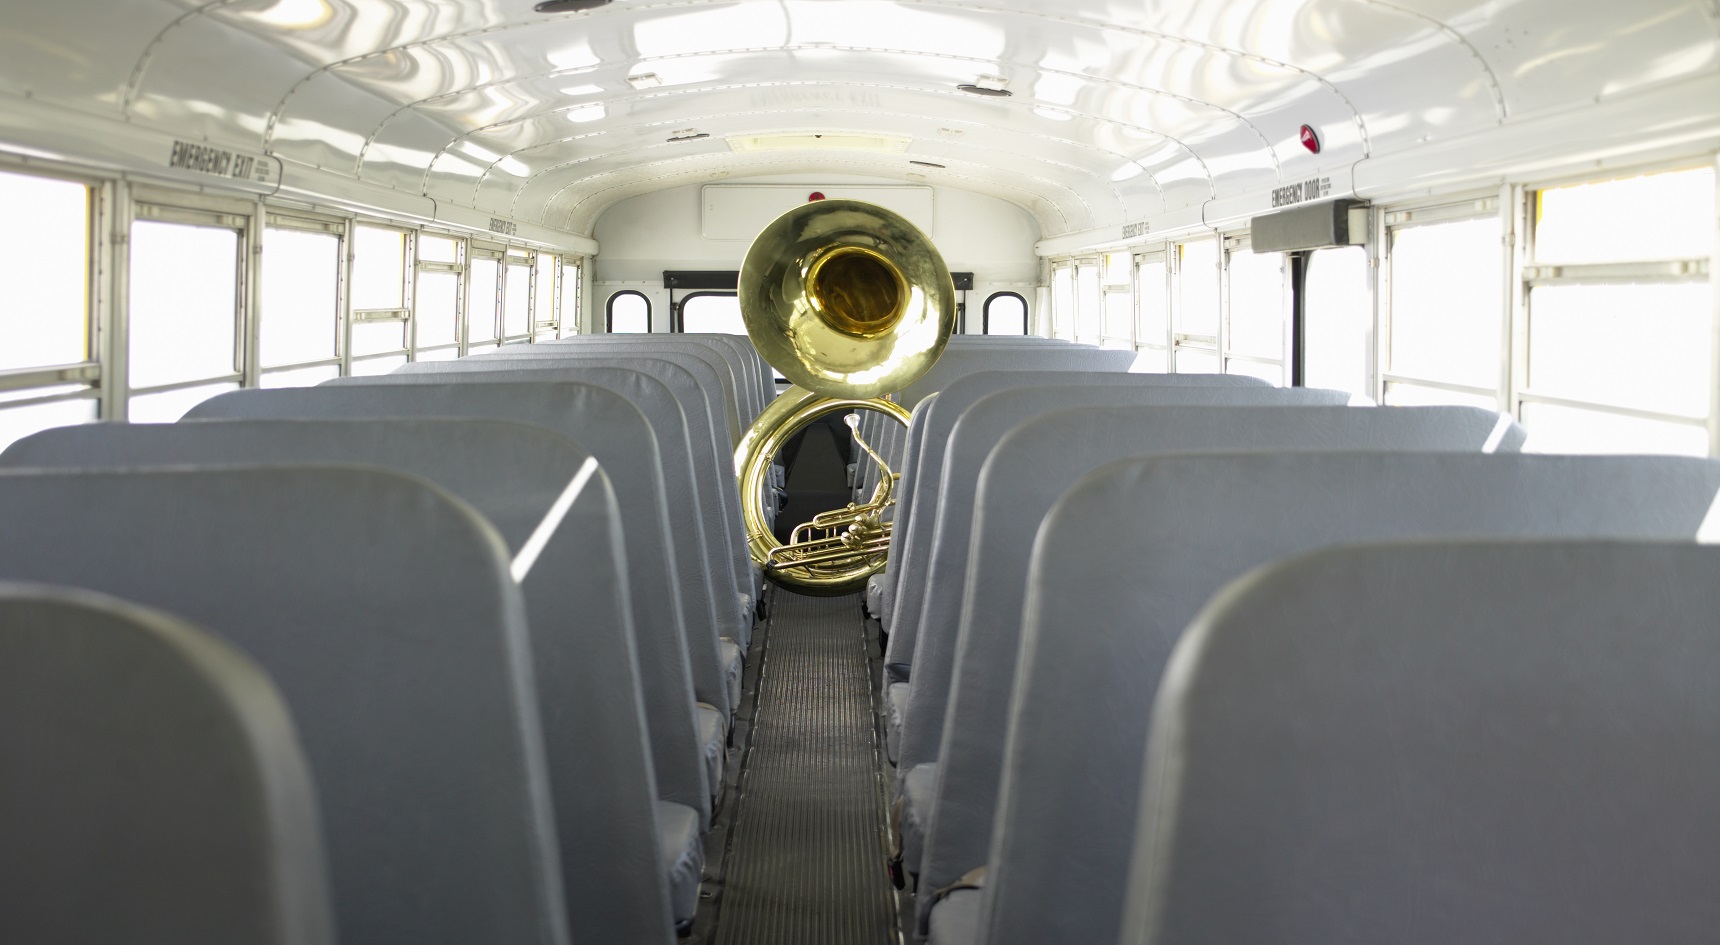 Musical instrument the tuba left on an empty bus.